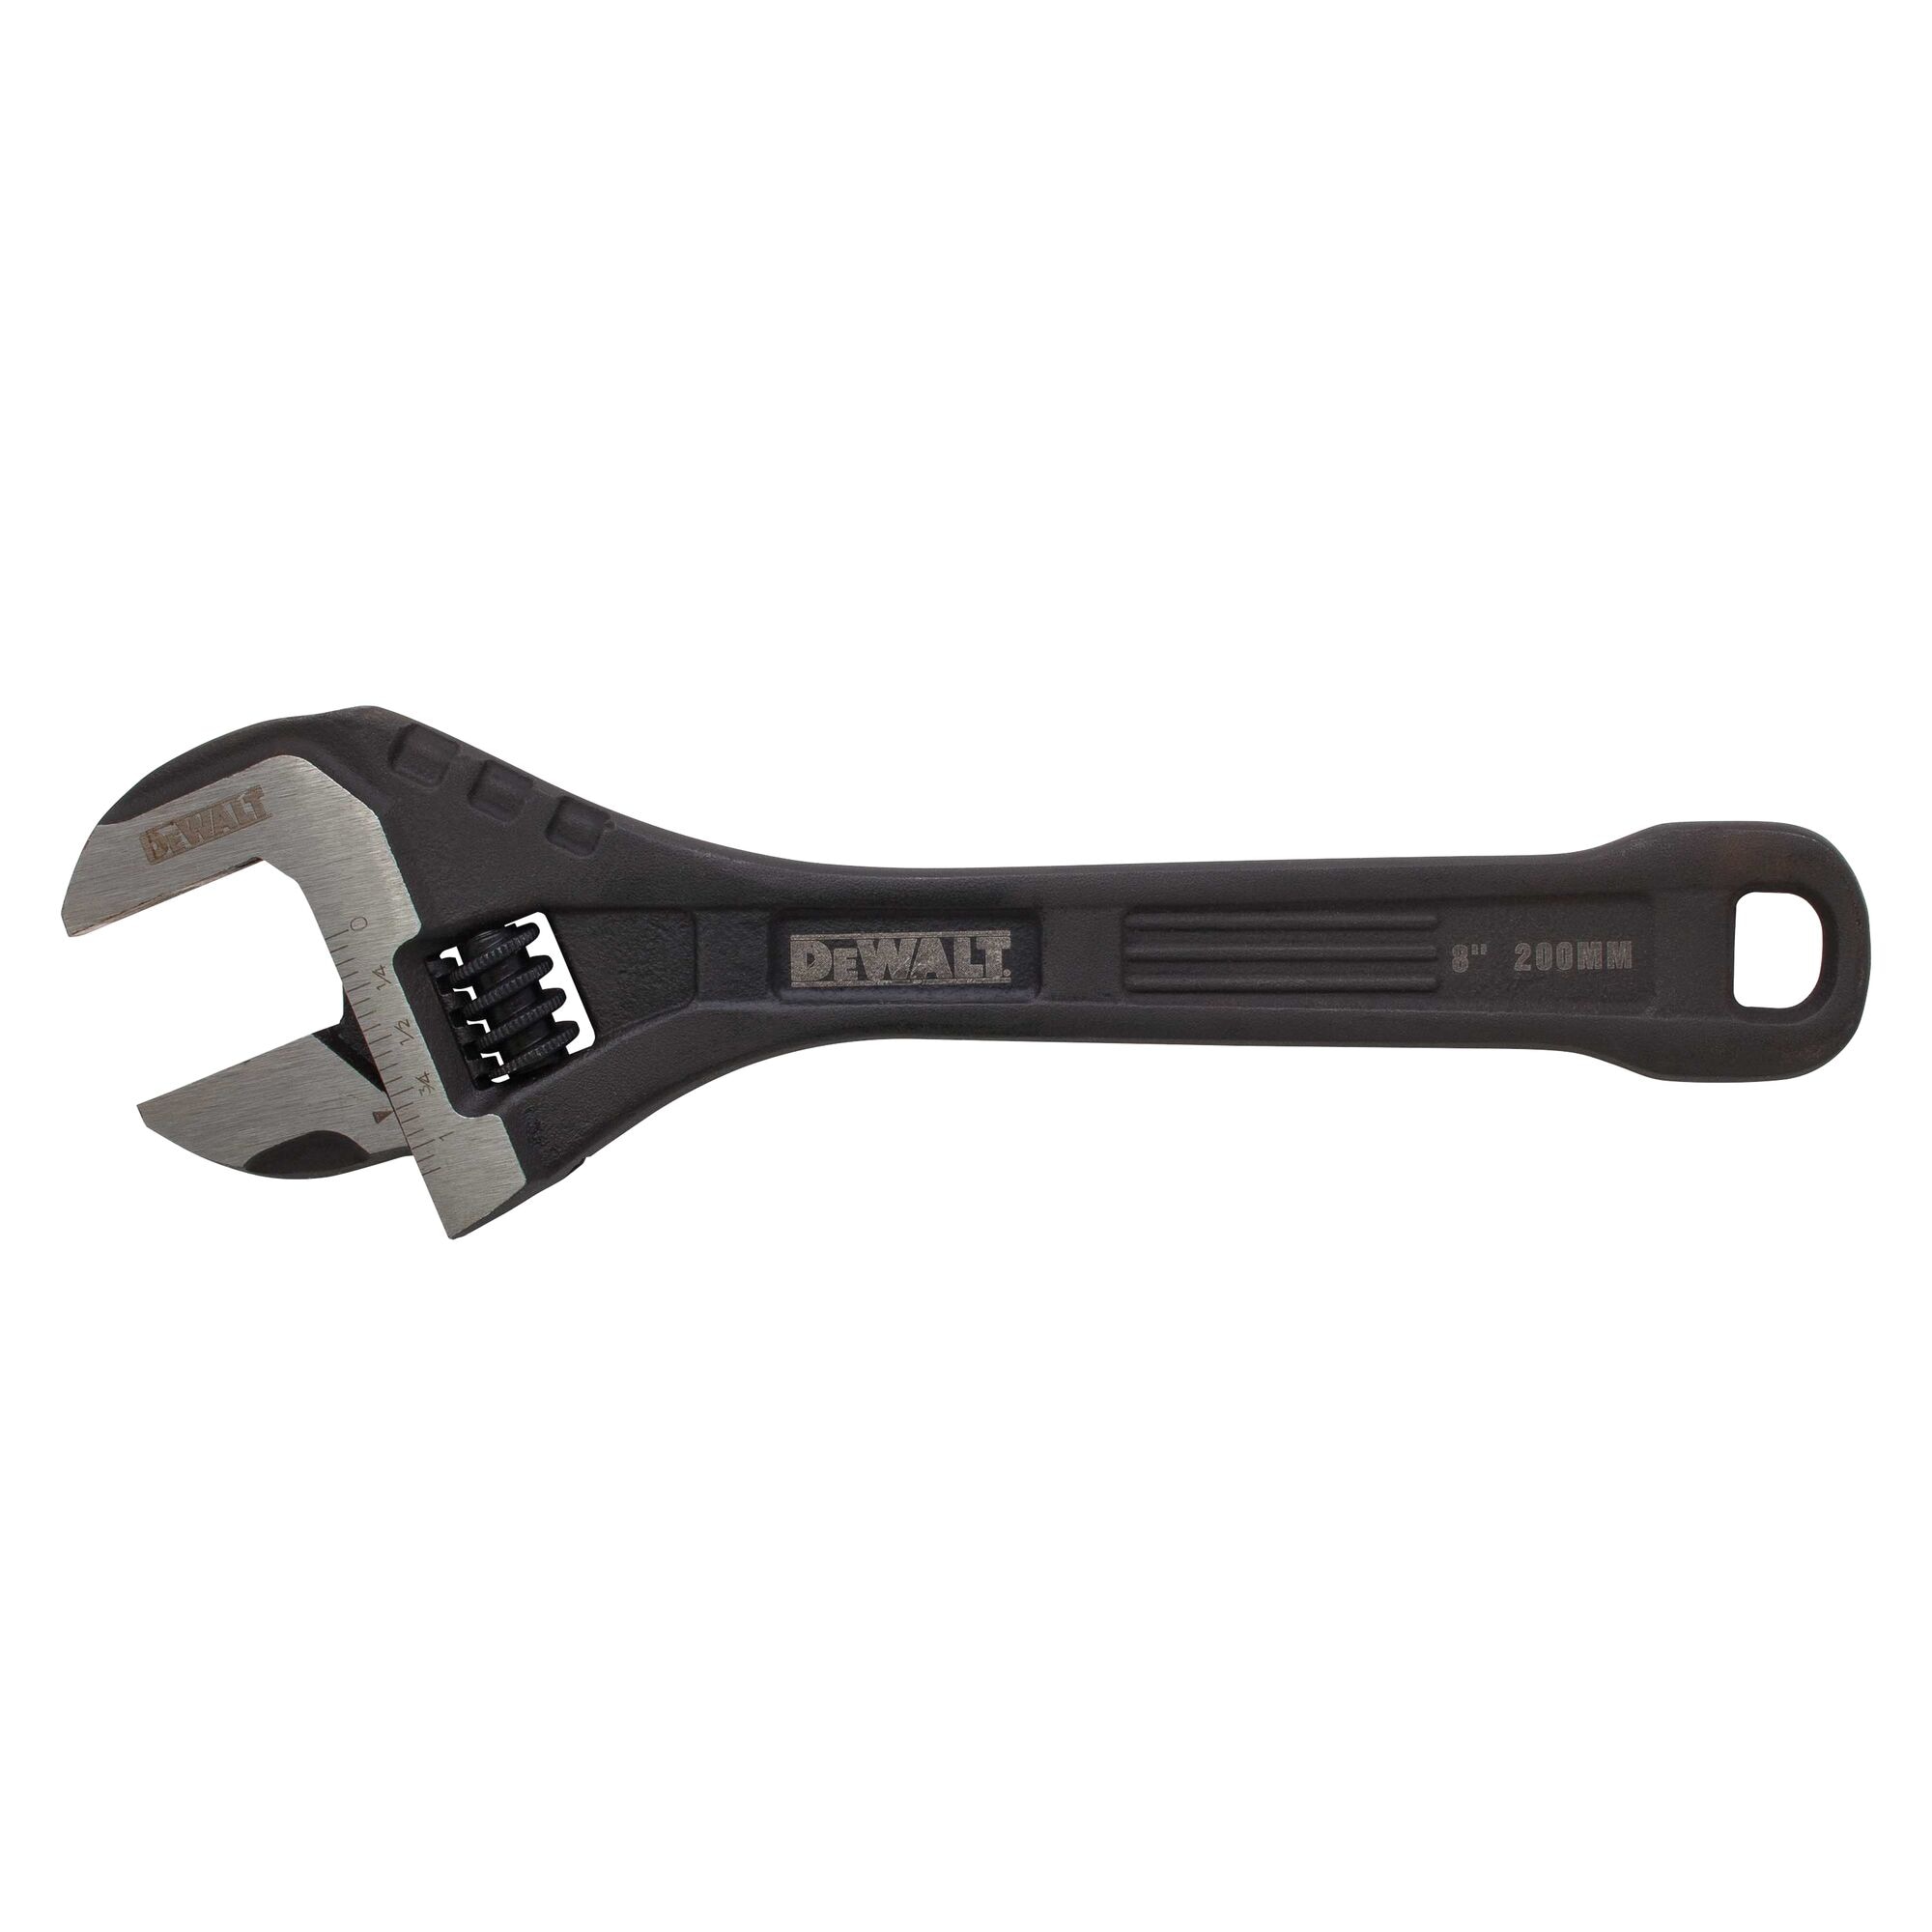 Black & Decker AutoWrench Power Adjustable Wrench Review 